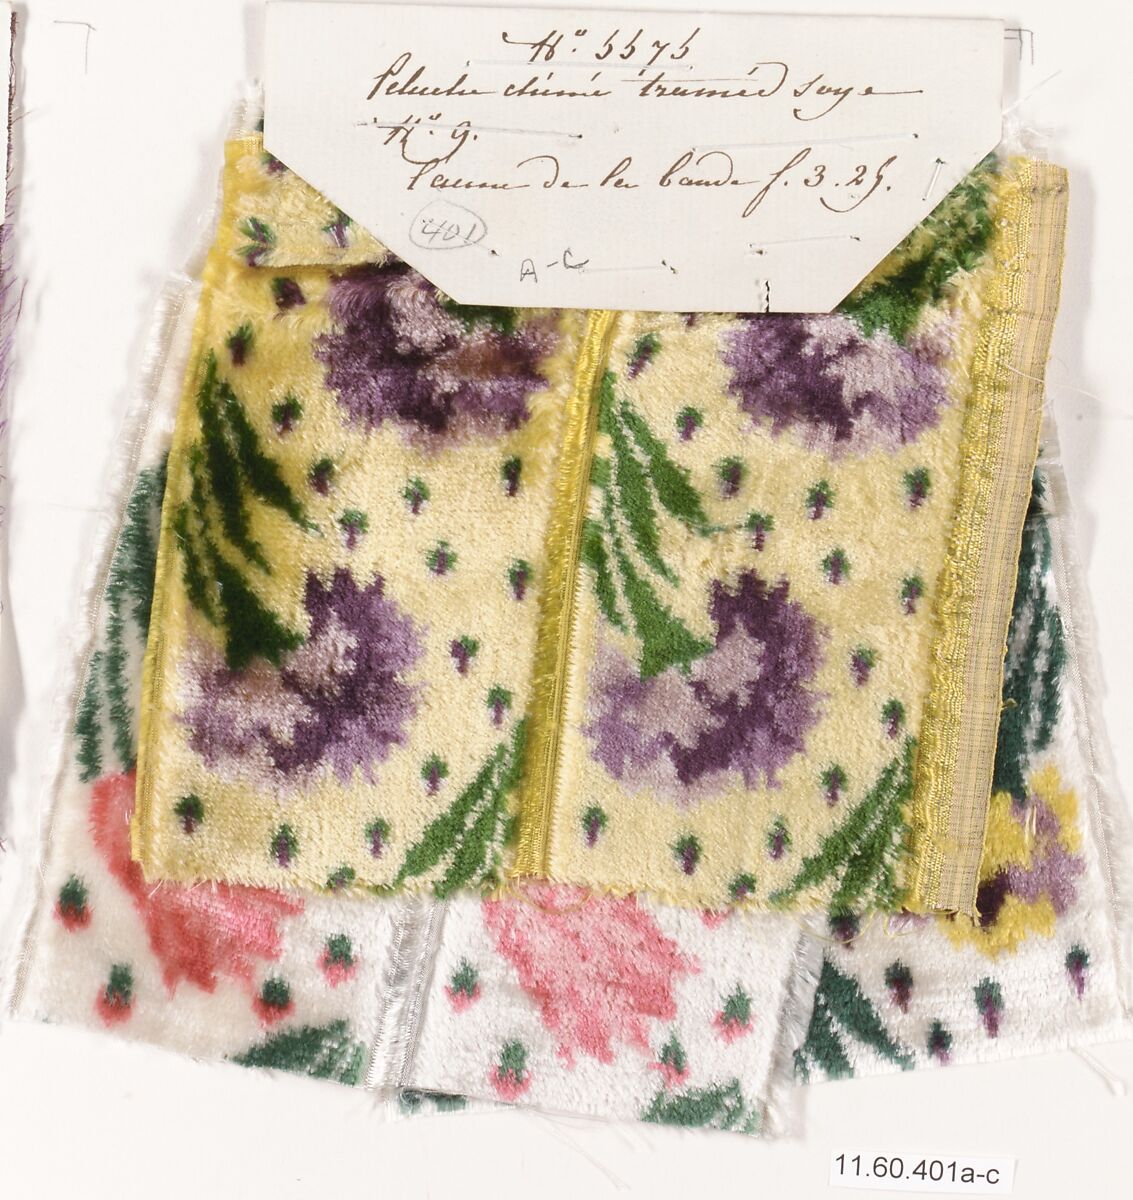 Fragments, Silk, possibly French 